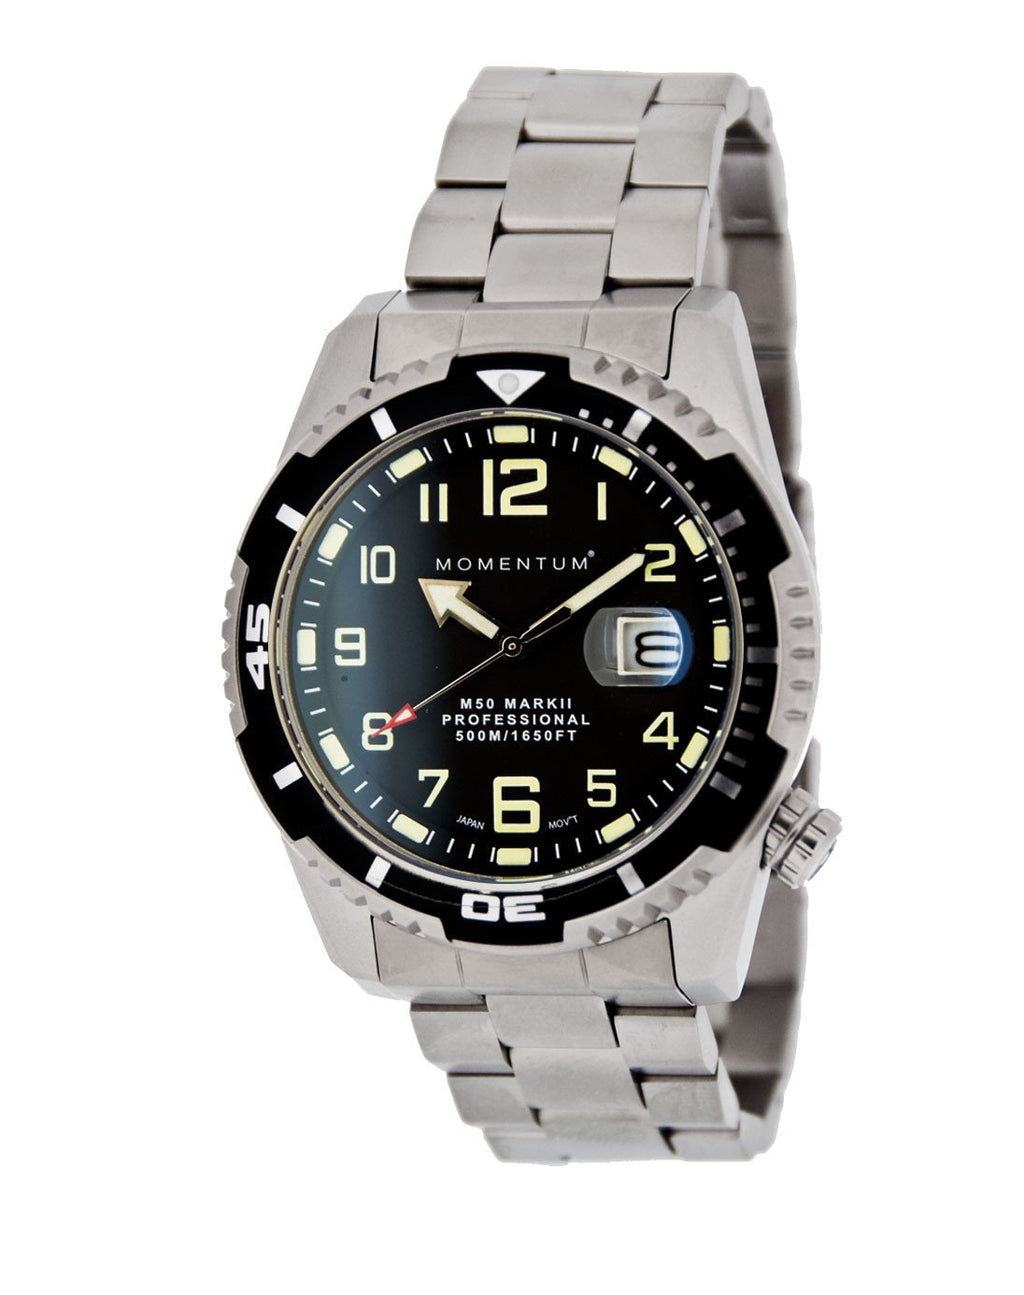 Momentum Watch - M50 Military Dive